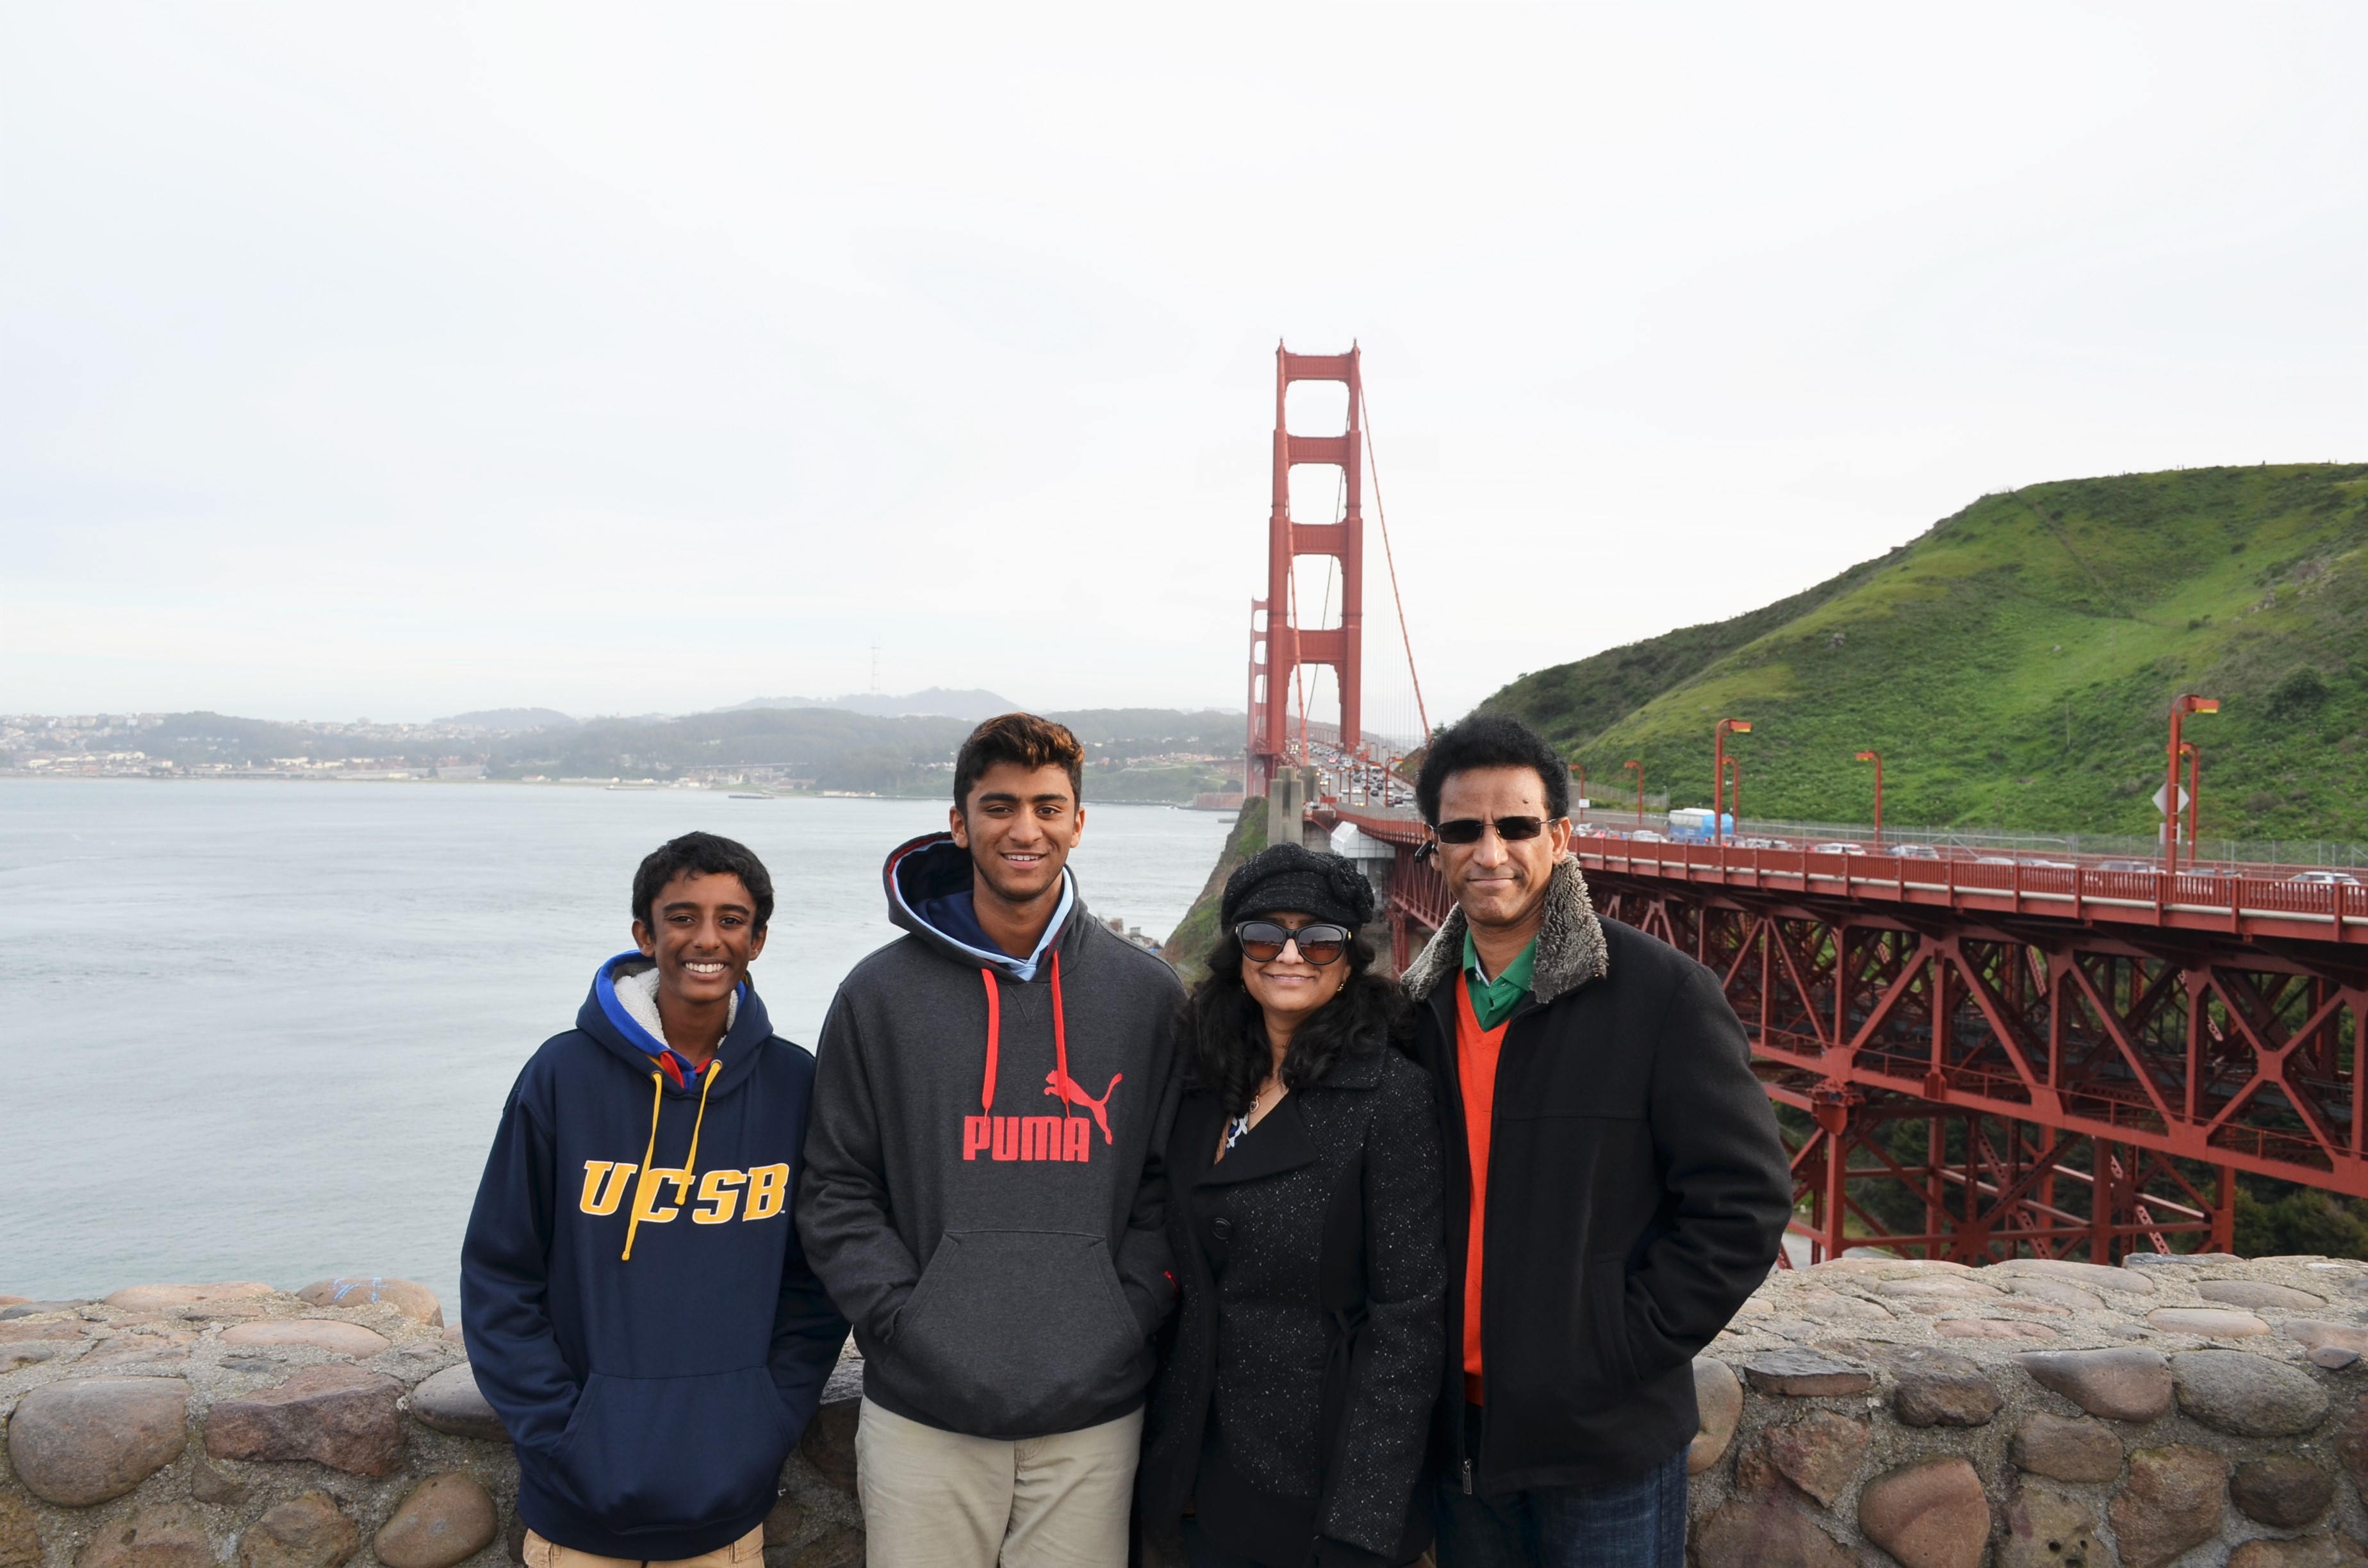 Deep and her family in San Francisco